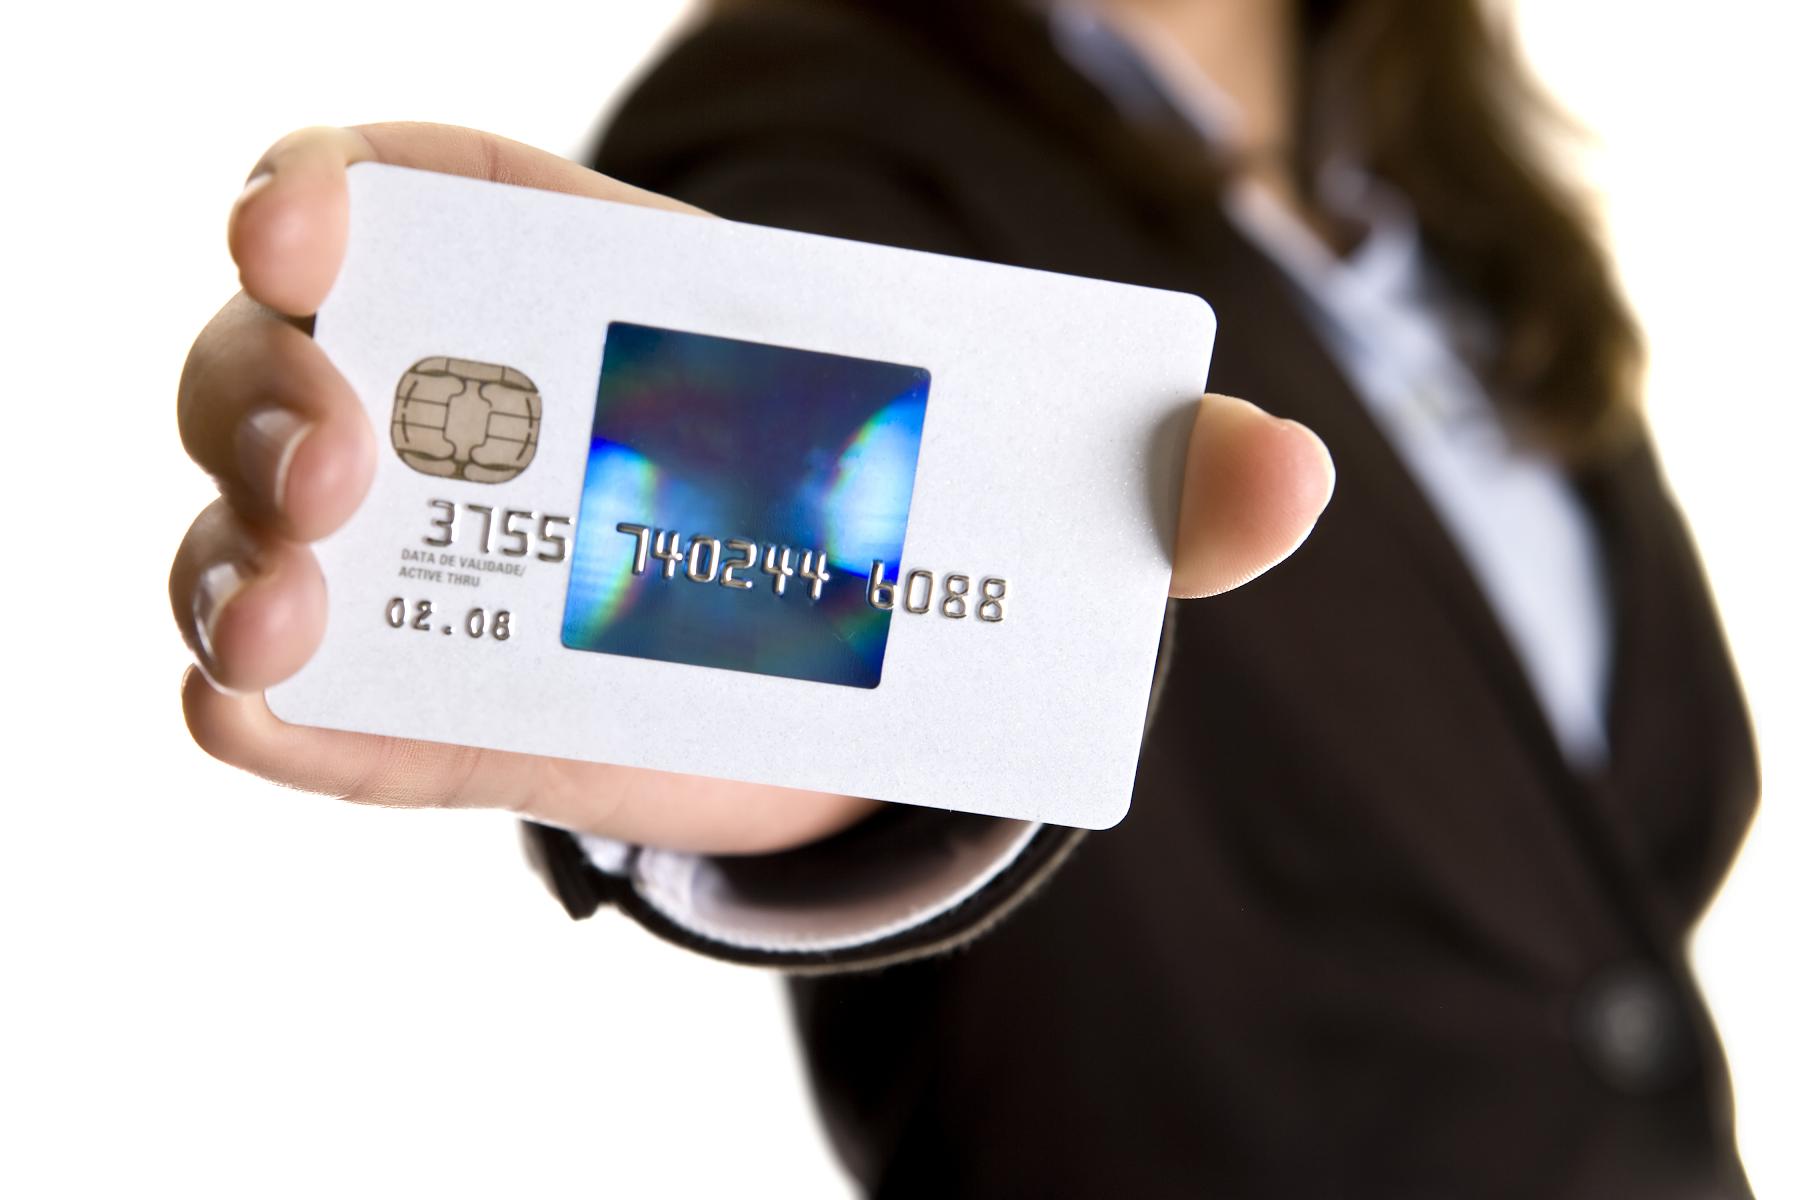 business credit card being held in hand